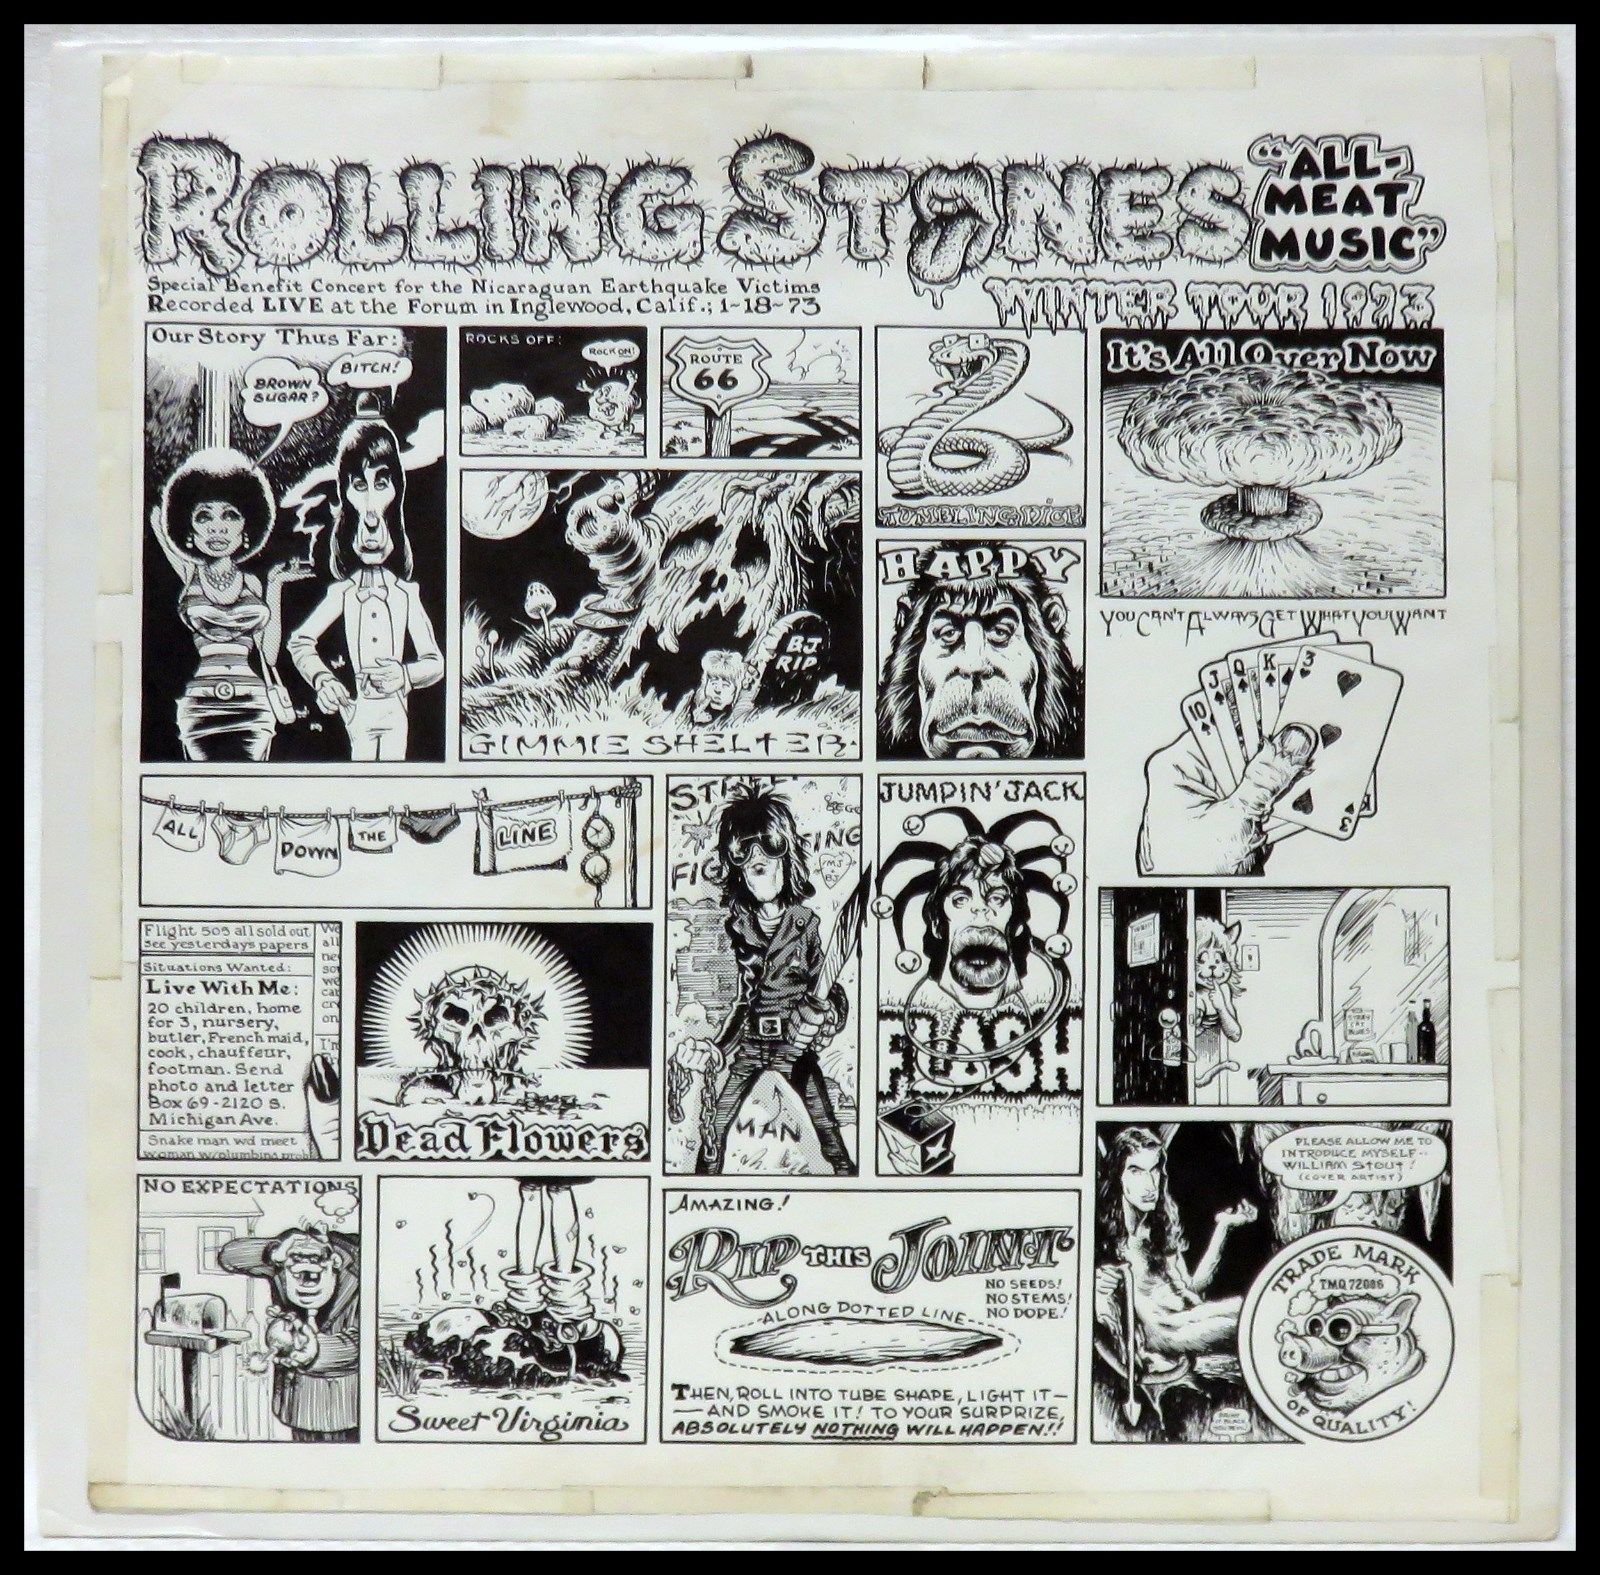 popsike.com - The Rolling Stones - 